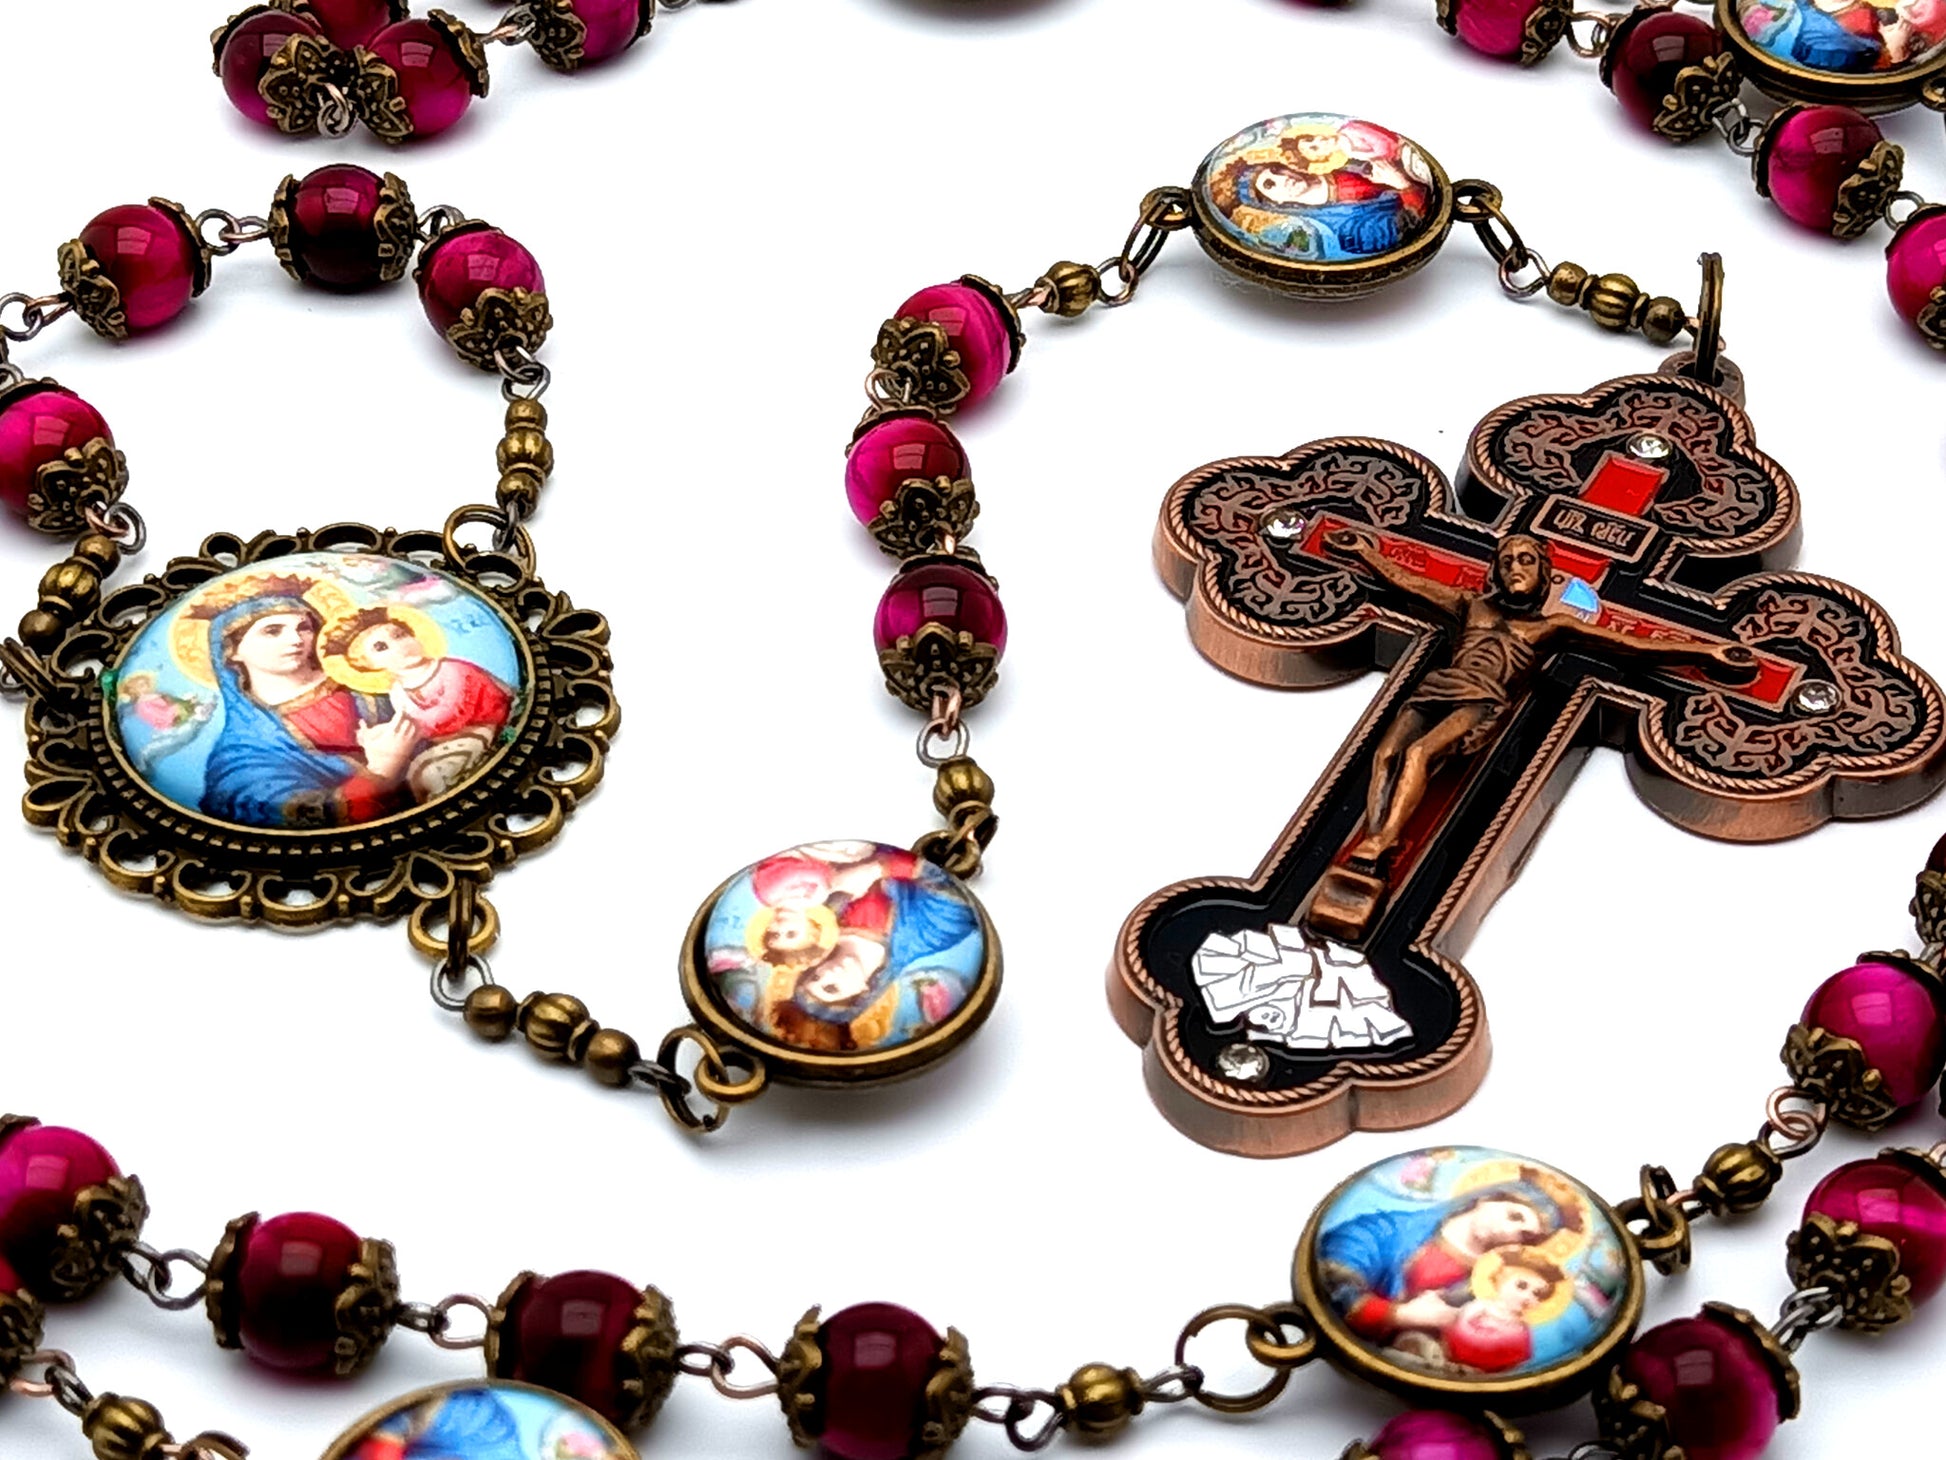 Vintage style Our Lady of Perpetual Help unique rosary beads with tigers eye gemstone beads and large ornate enamel crucifix.